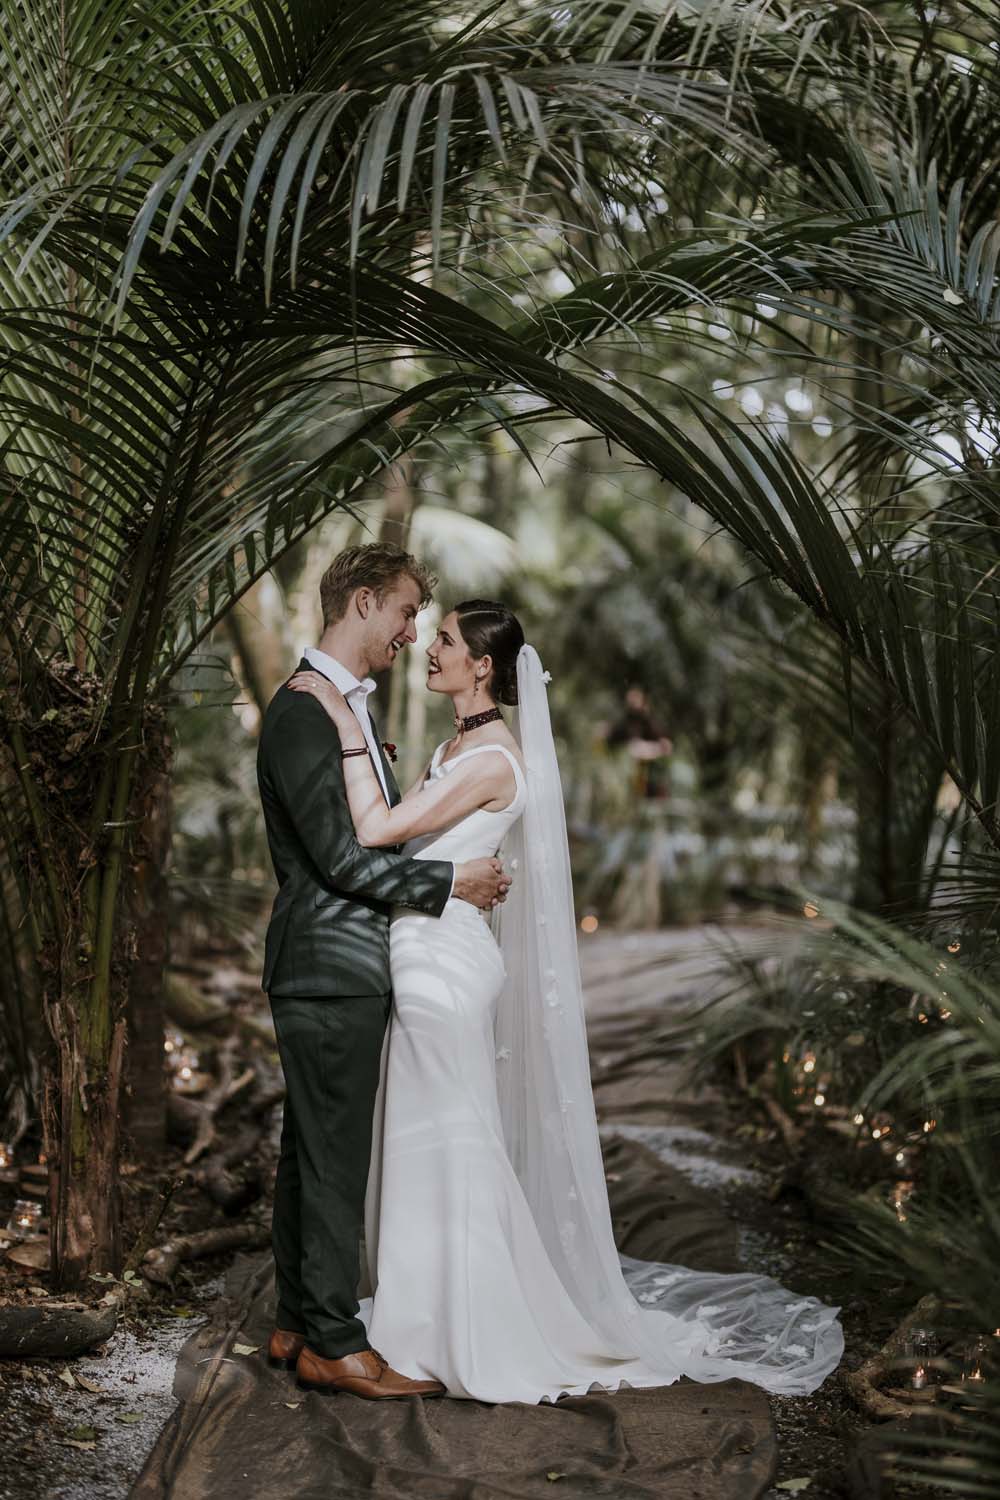 Whimsical Park Wedding in Auckland